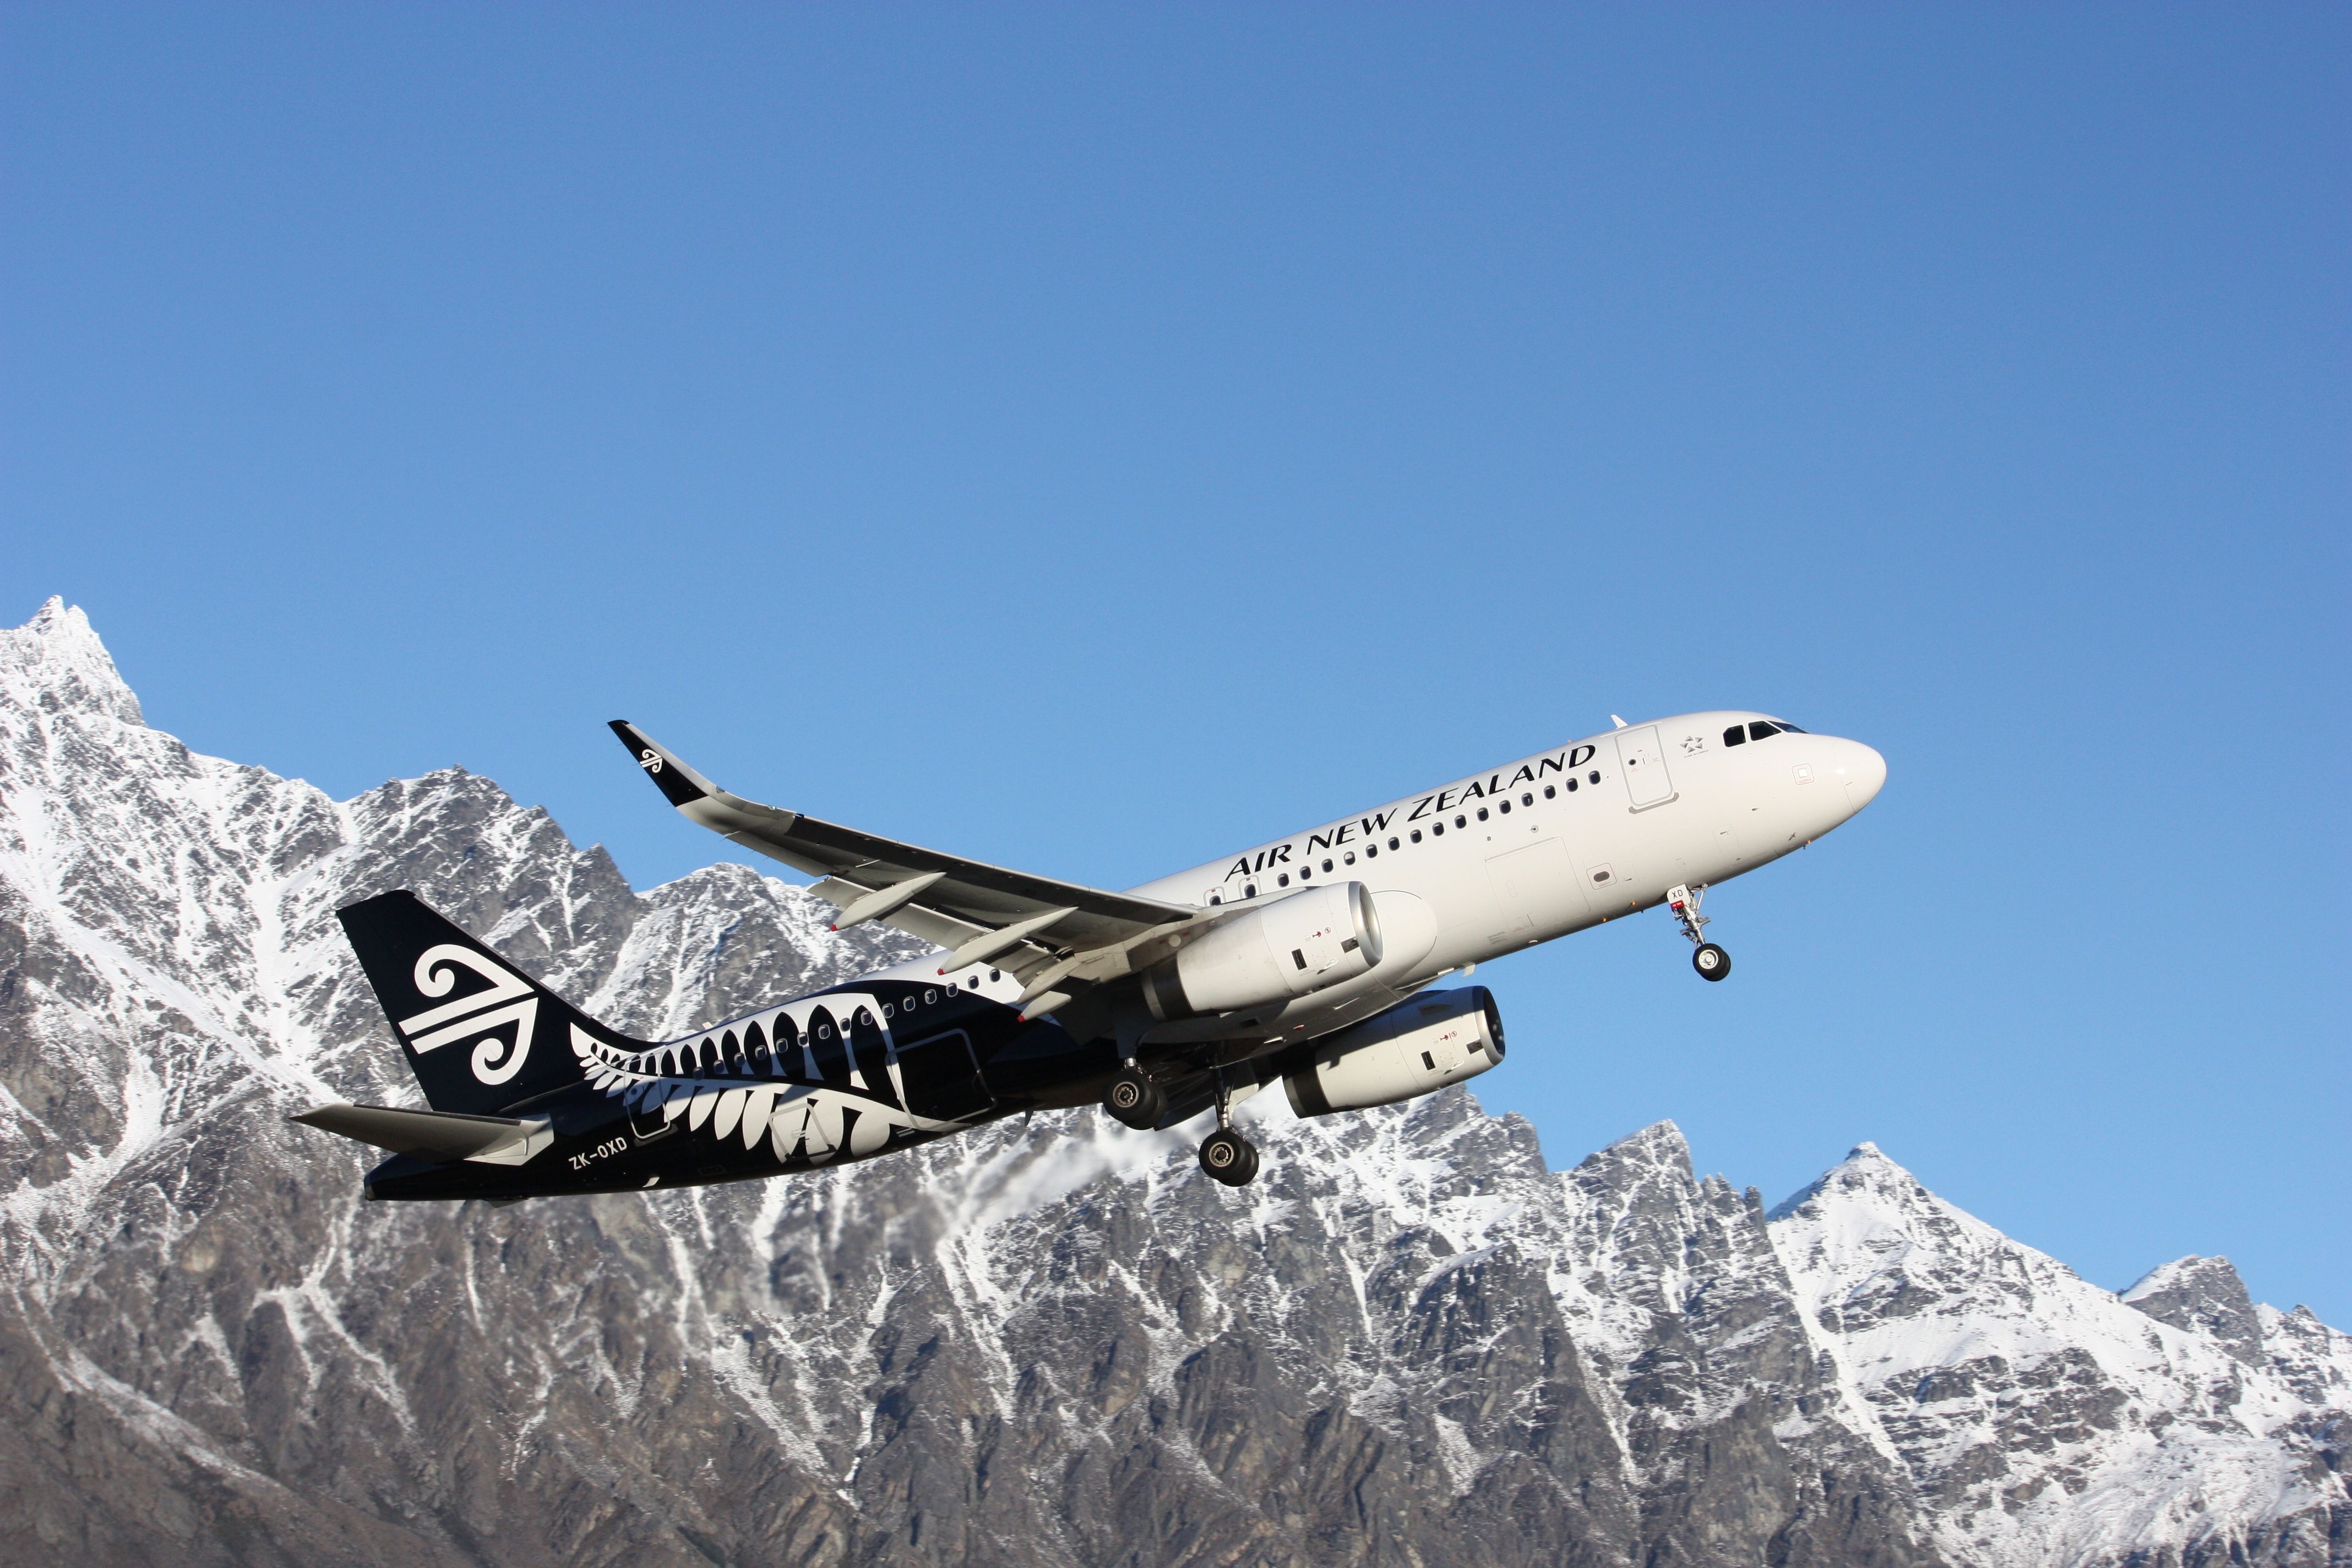 Air New Zealand taking off from Queenstown